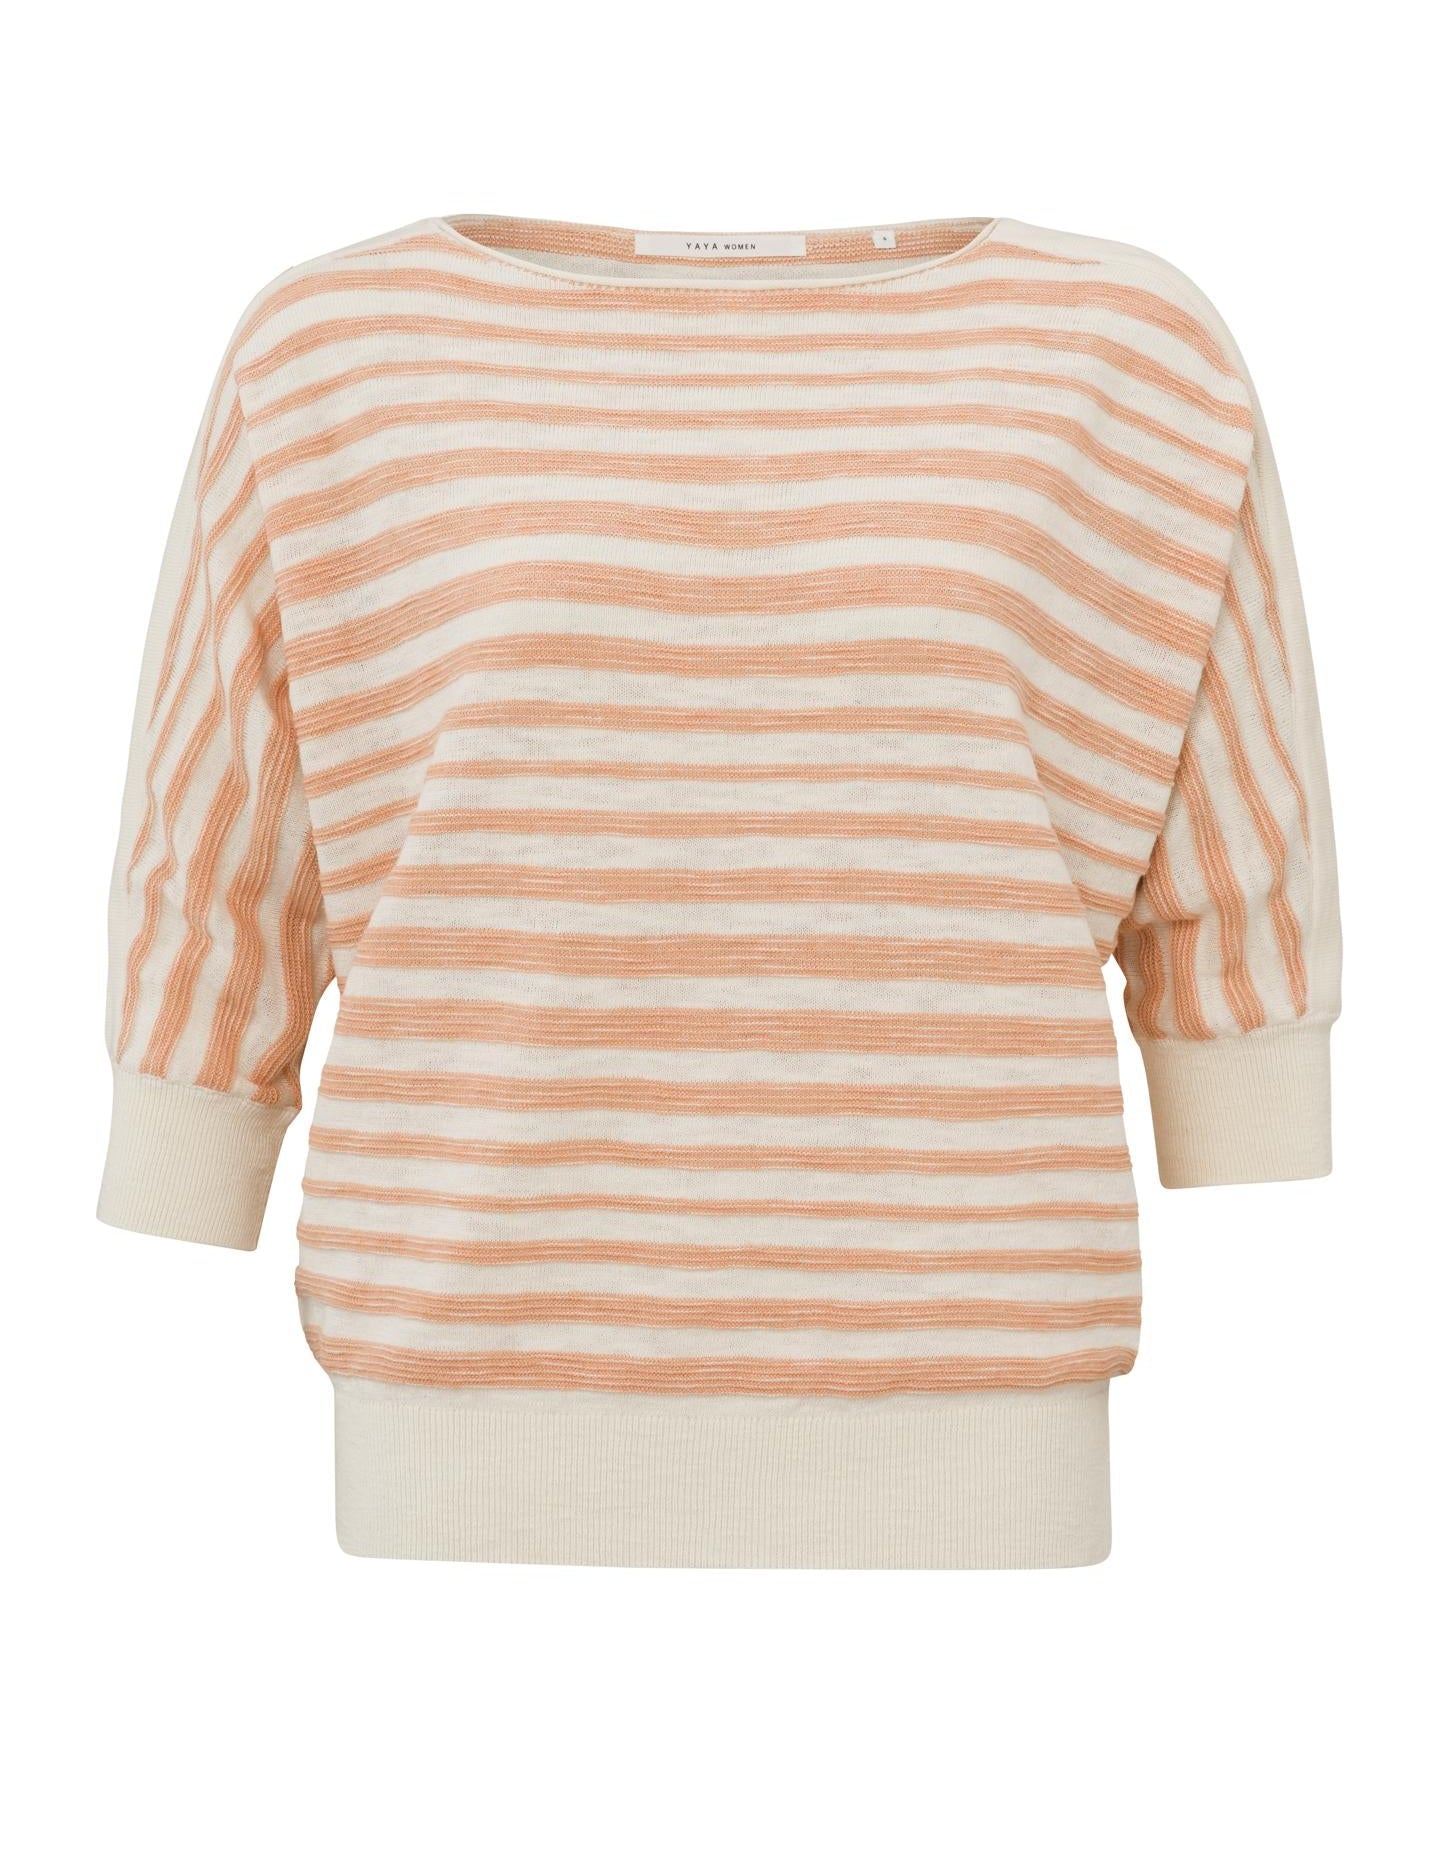 batwing-sweater-with-boatneck-half-long-sleeves-and-stripes-dusty-coral-orange-dessin_2880x_4da43fa5-4799-4d18-80a7-d3773c9f3a43.jpg